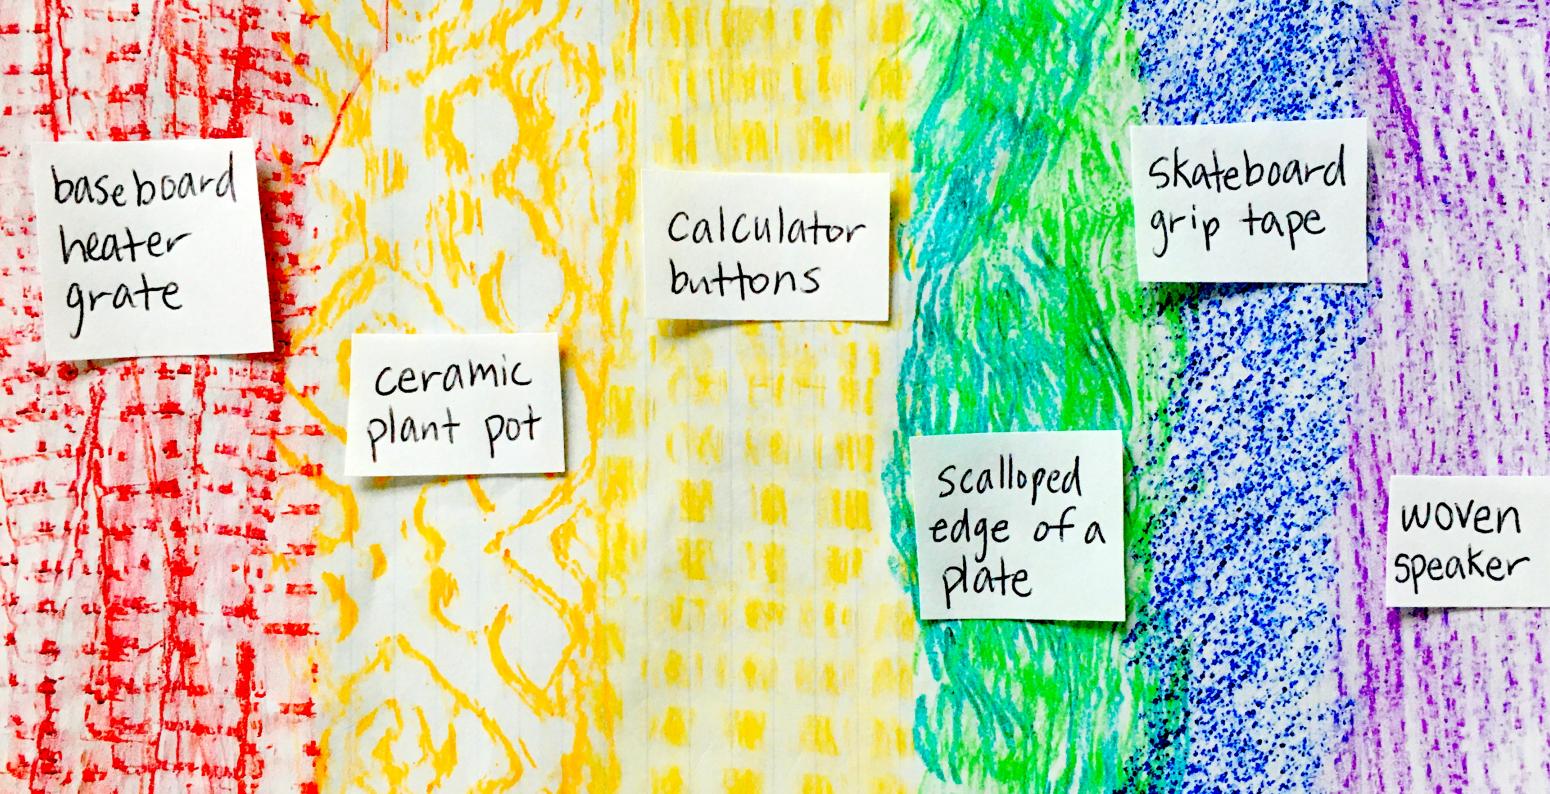 Colorful textures on notebook paper with labels saying what was used to create them.